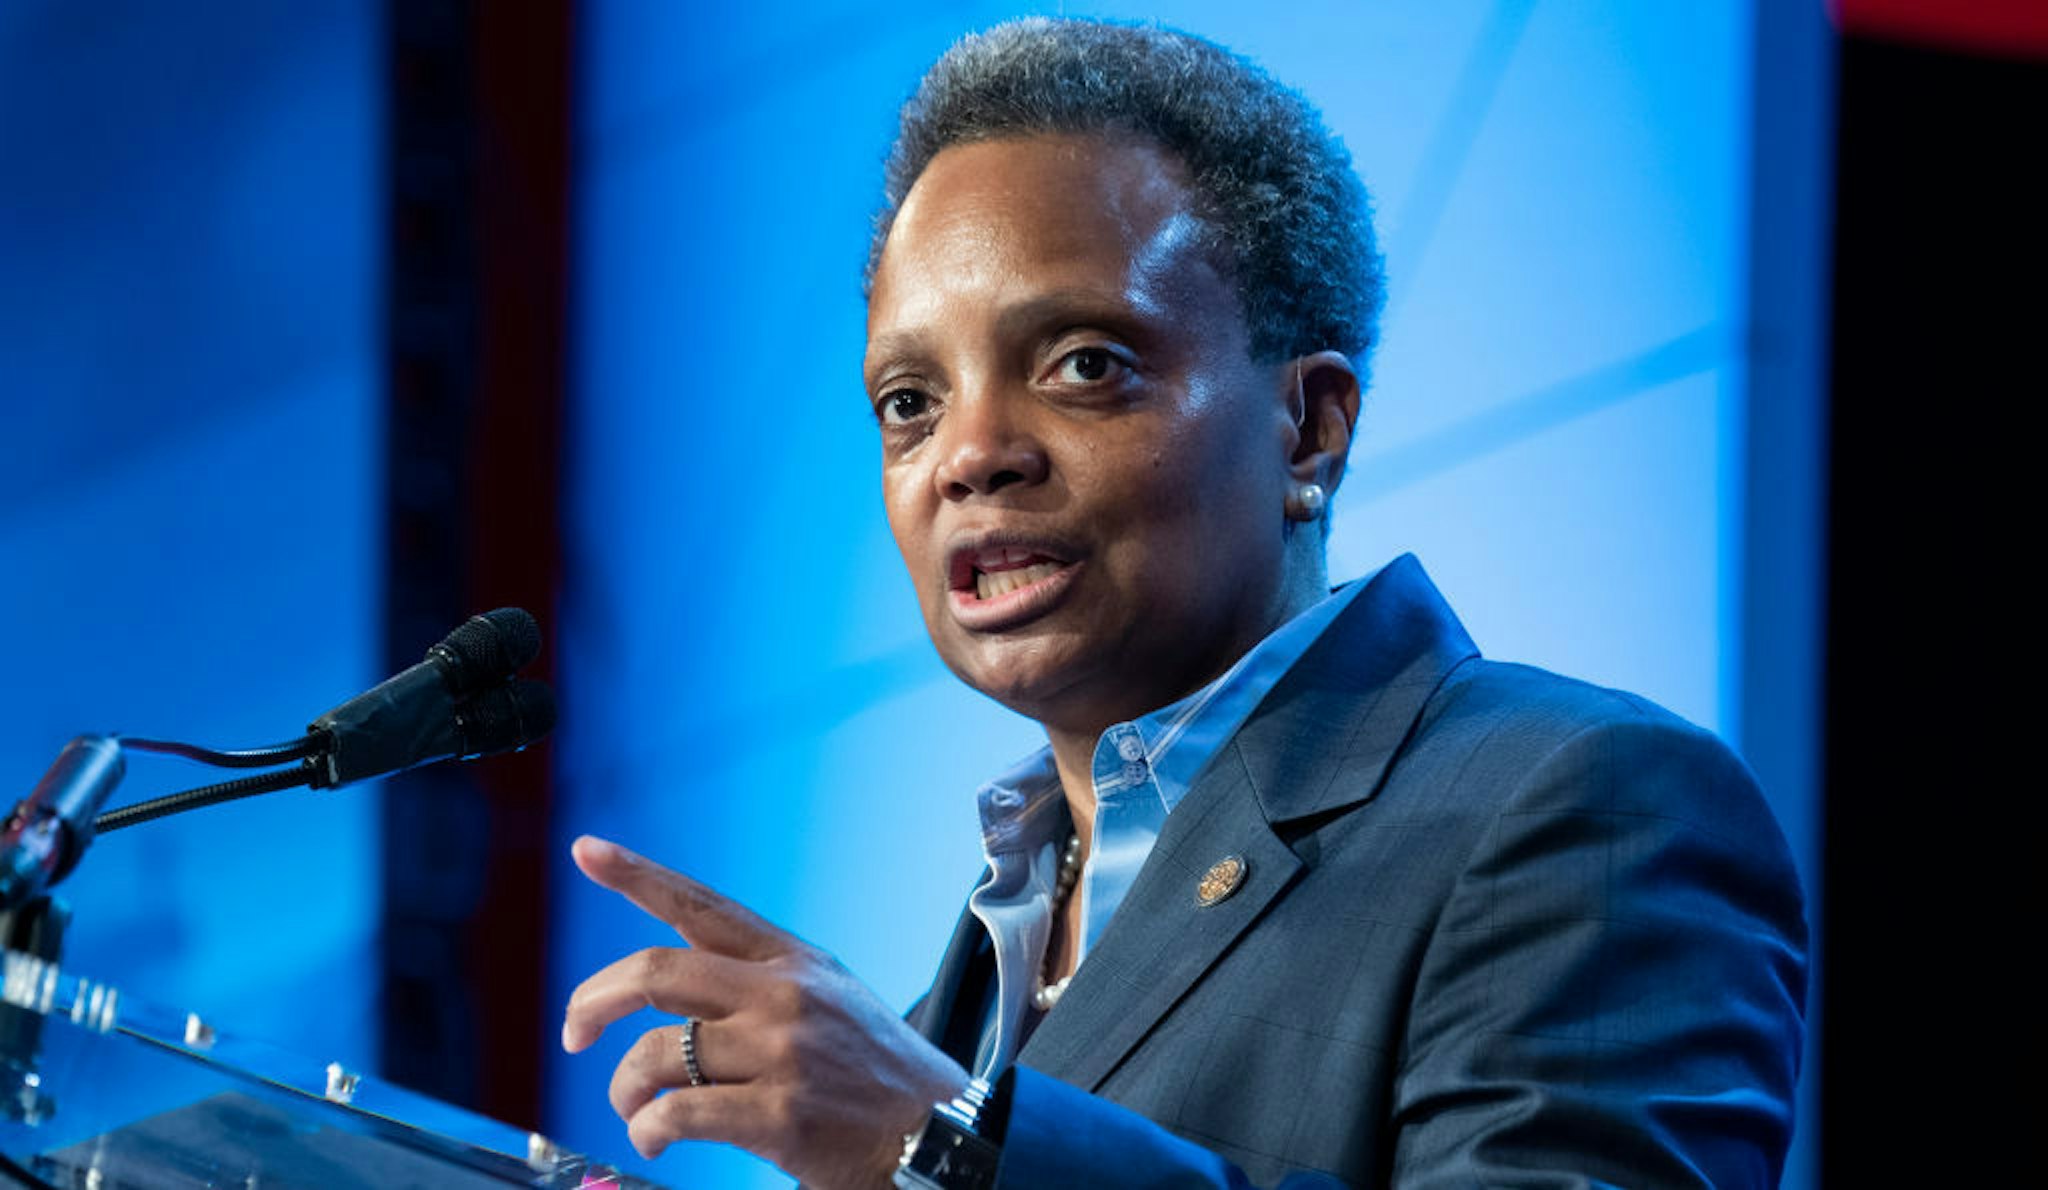 Chicago Mayor Lori Lightfoot, speaks during the U.S Conference of Mayors’ 88th Winter Meeting at the Capital Hilton in Washington, D.C., on Thursday, January 23, 2020. (Photo By Tom Williams/CQ Roll Call)